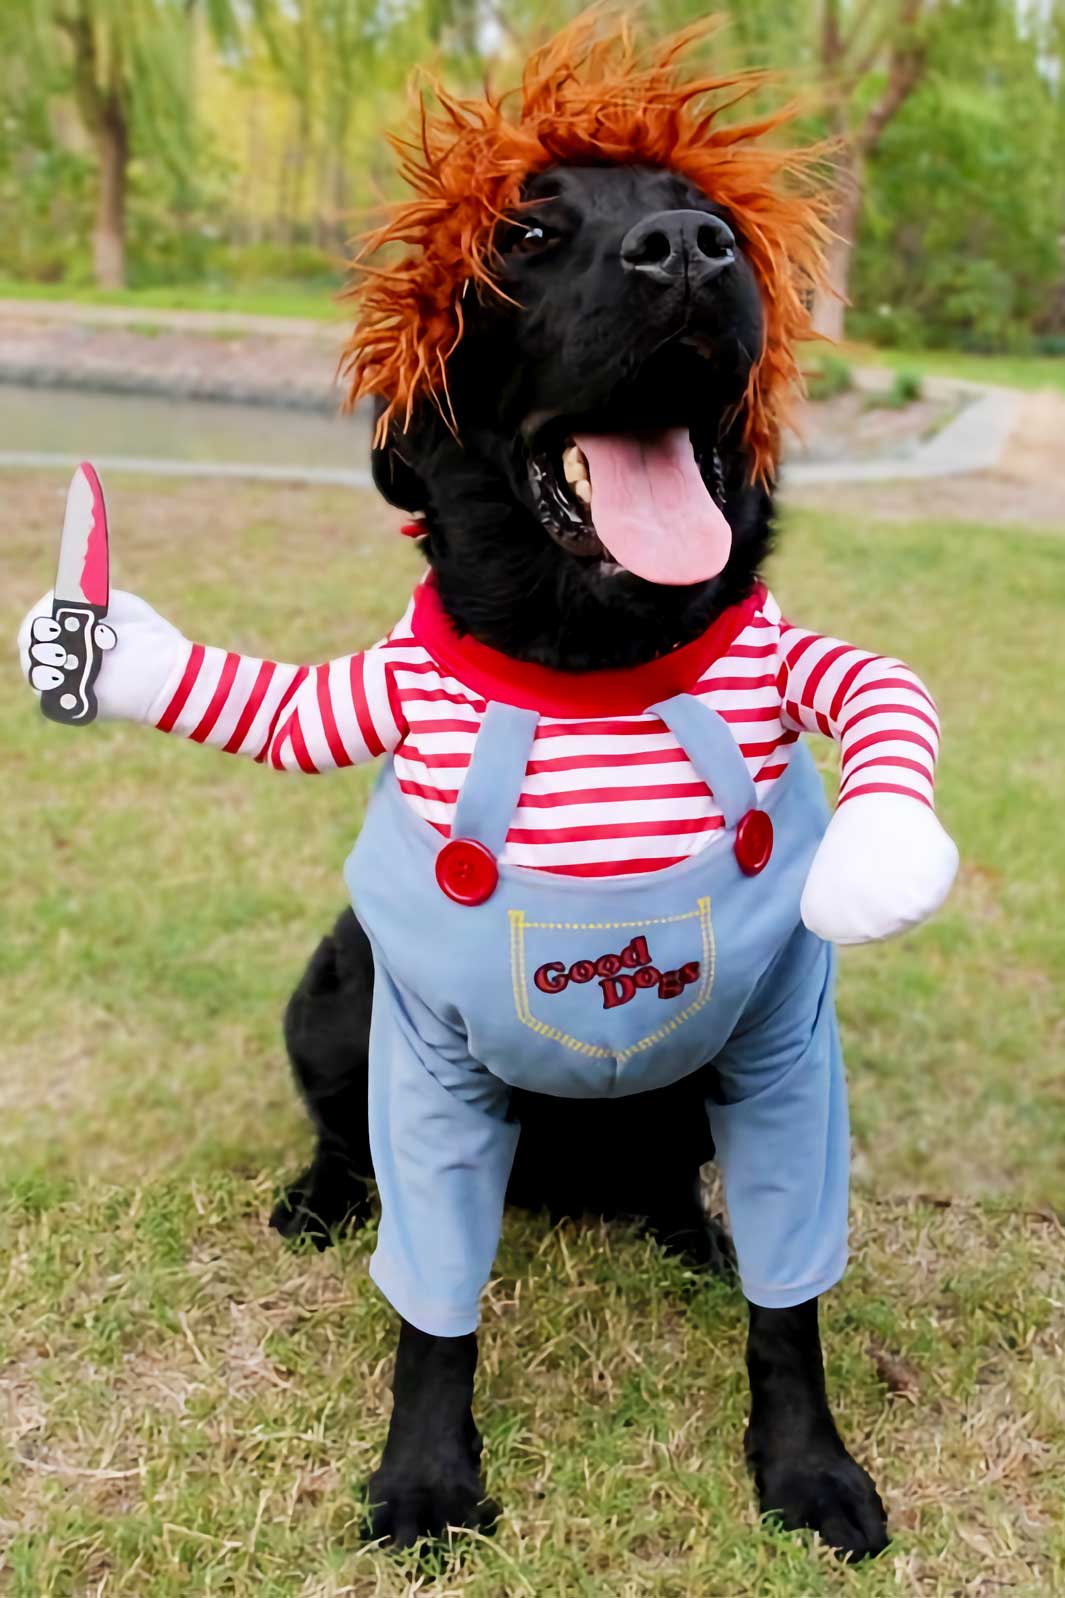 Chocolate Labrador wearing the Chucky Doll Deadly Killer Dog Halloween Dog Costume from online dog costume shop they made me wear it.